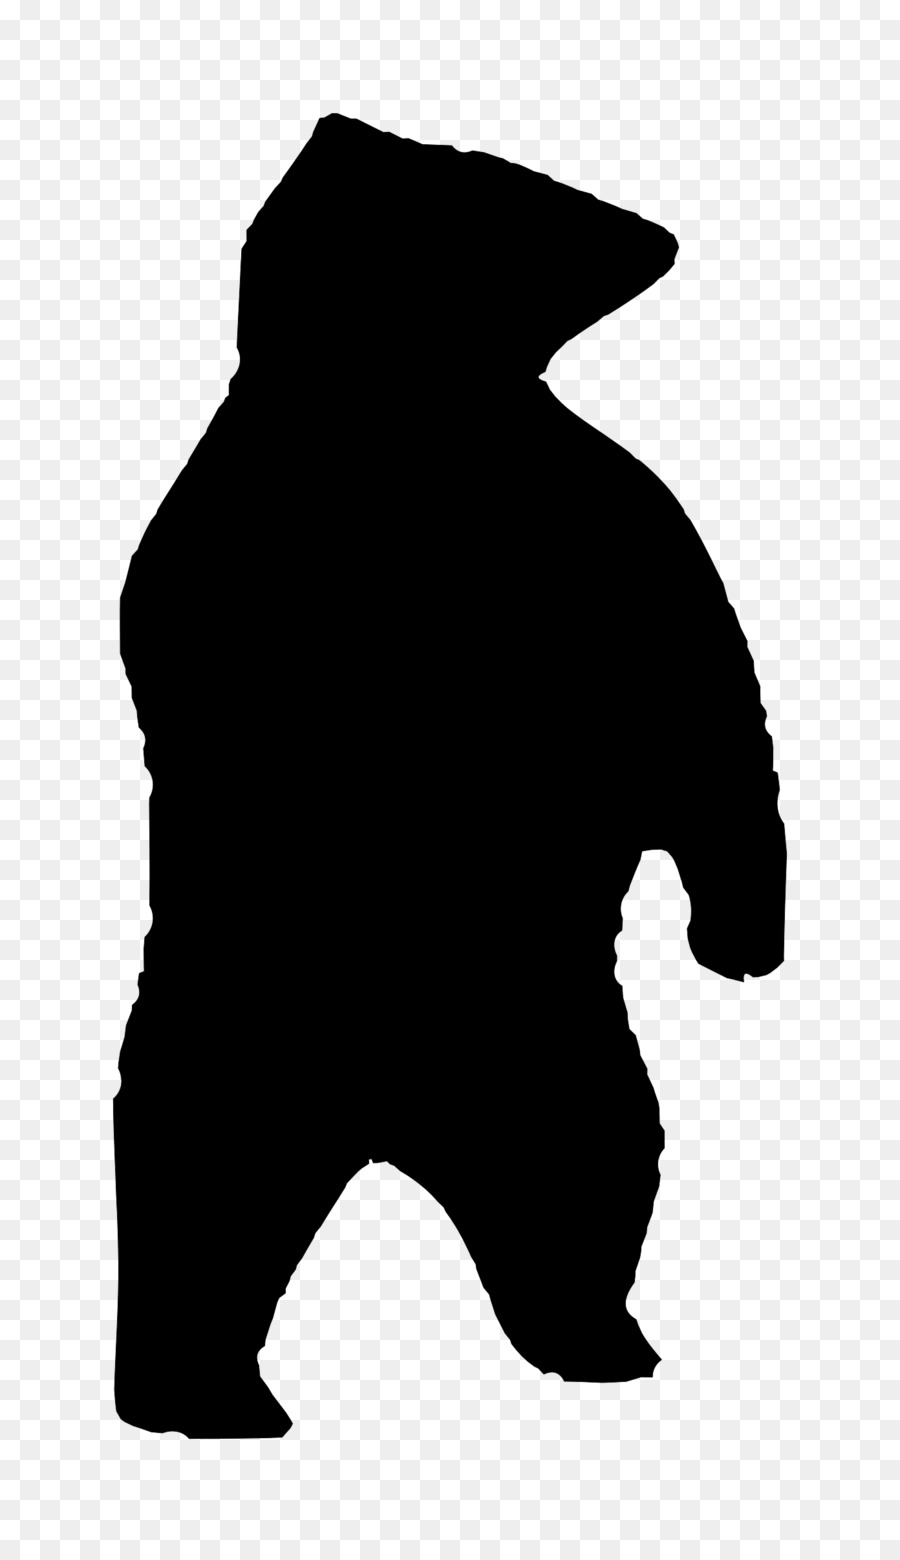 Polar bear American black bear Silhouette Clip art - silhouettes png download - 1392*2400 - Free Transparent Bear png Download.